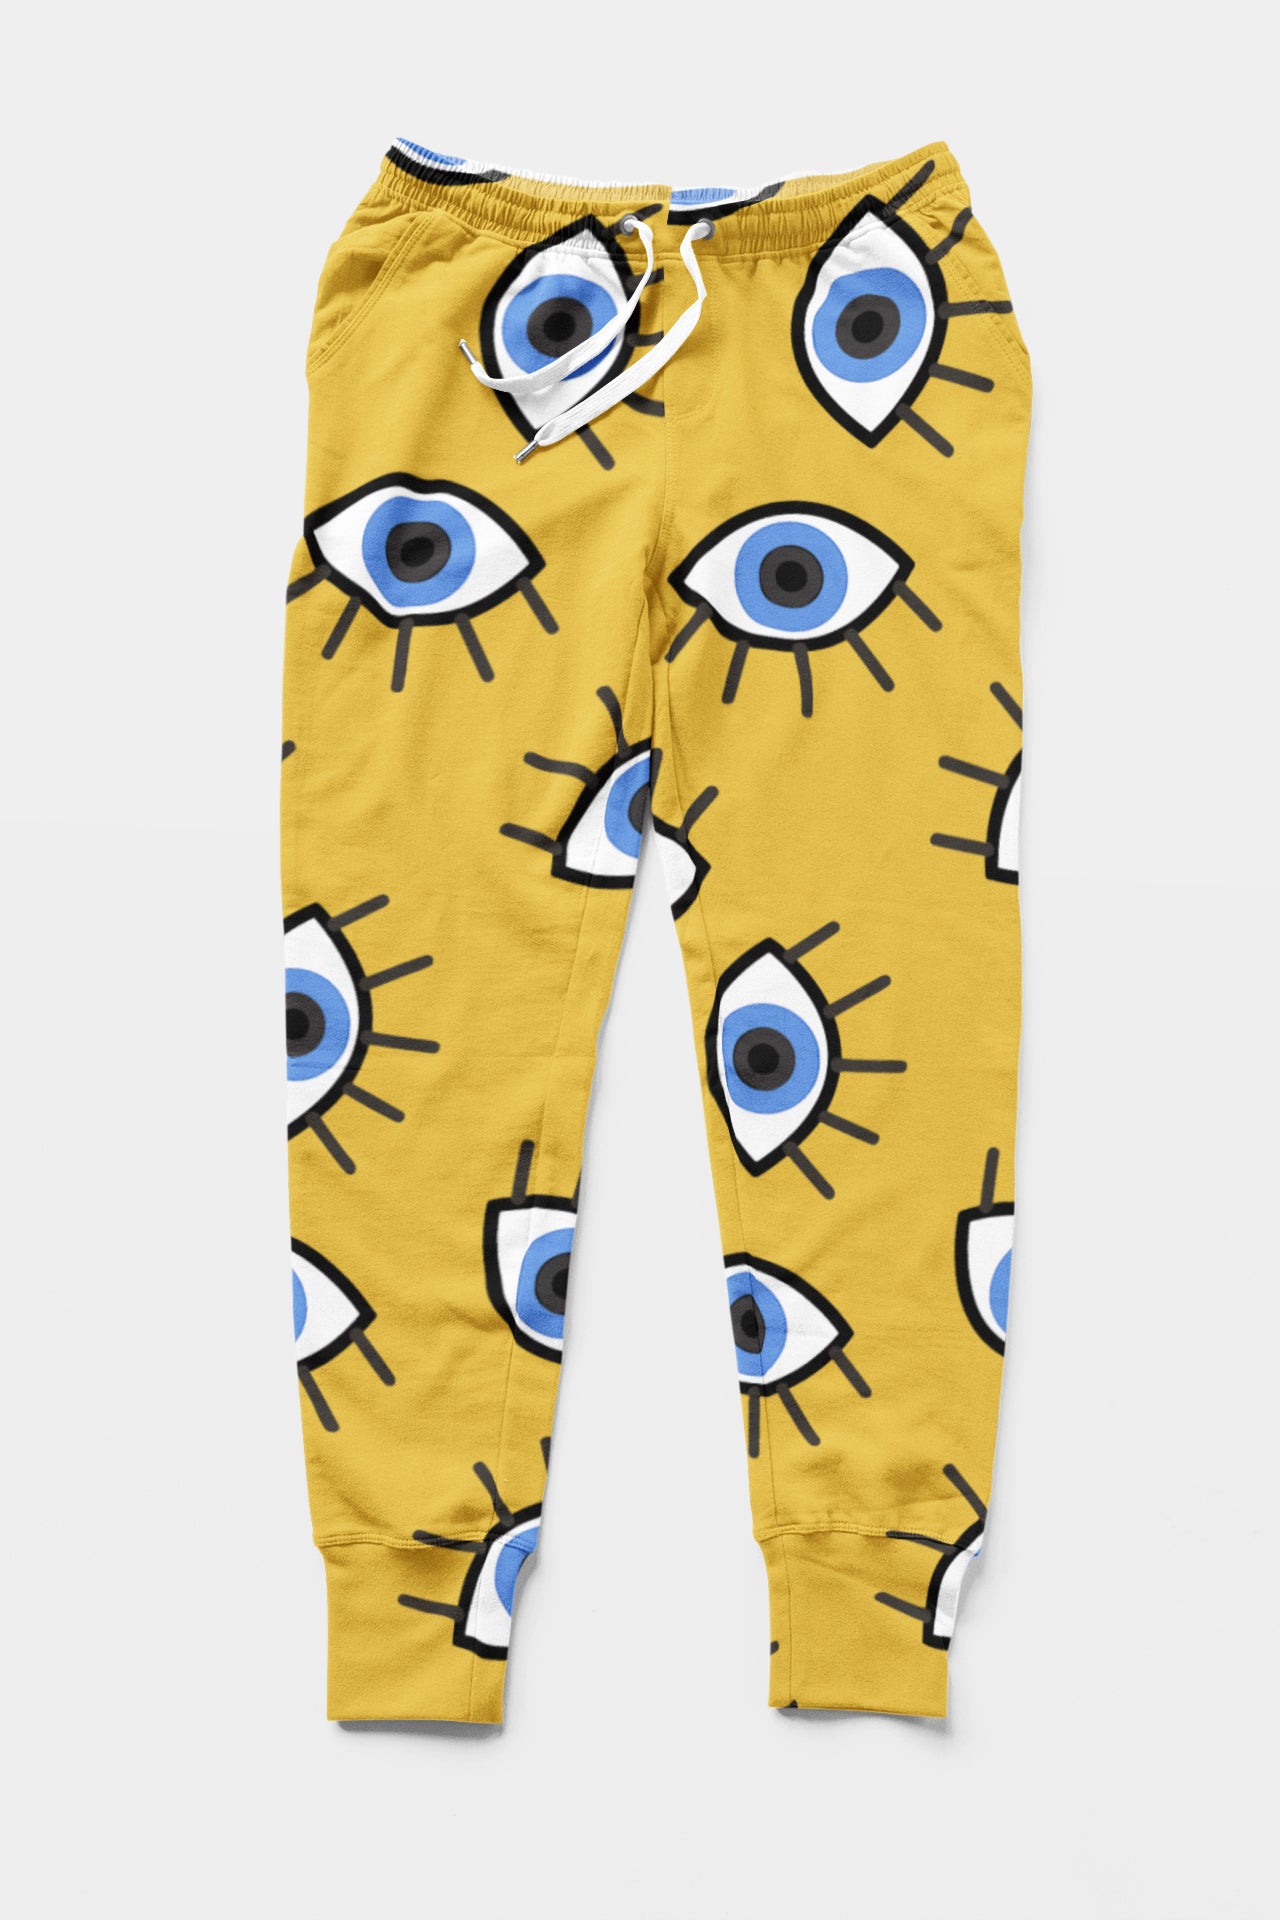 Men's Yellow All Over Printed Casual Joggers - #AOJ09 - SQUIREHOOD